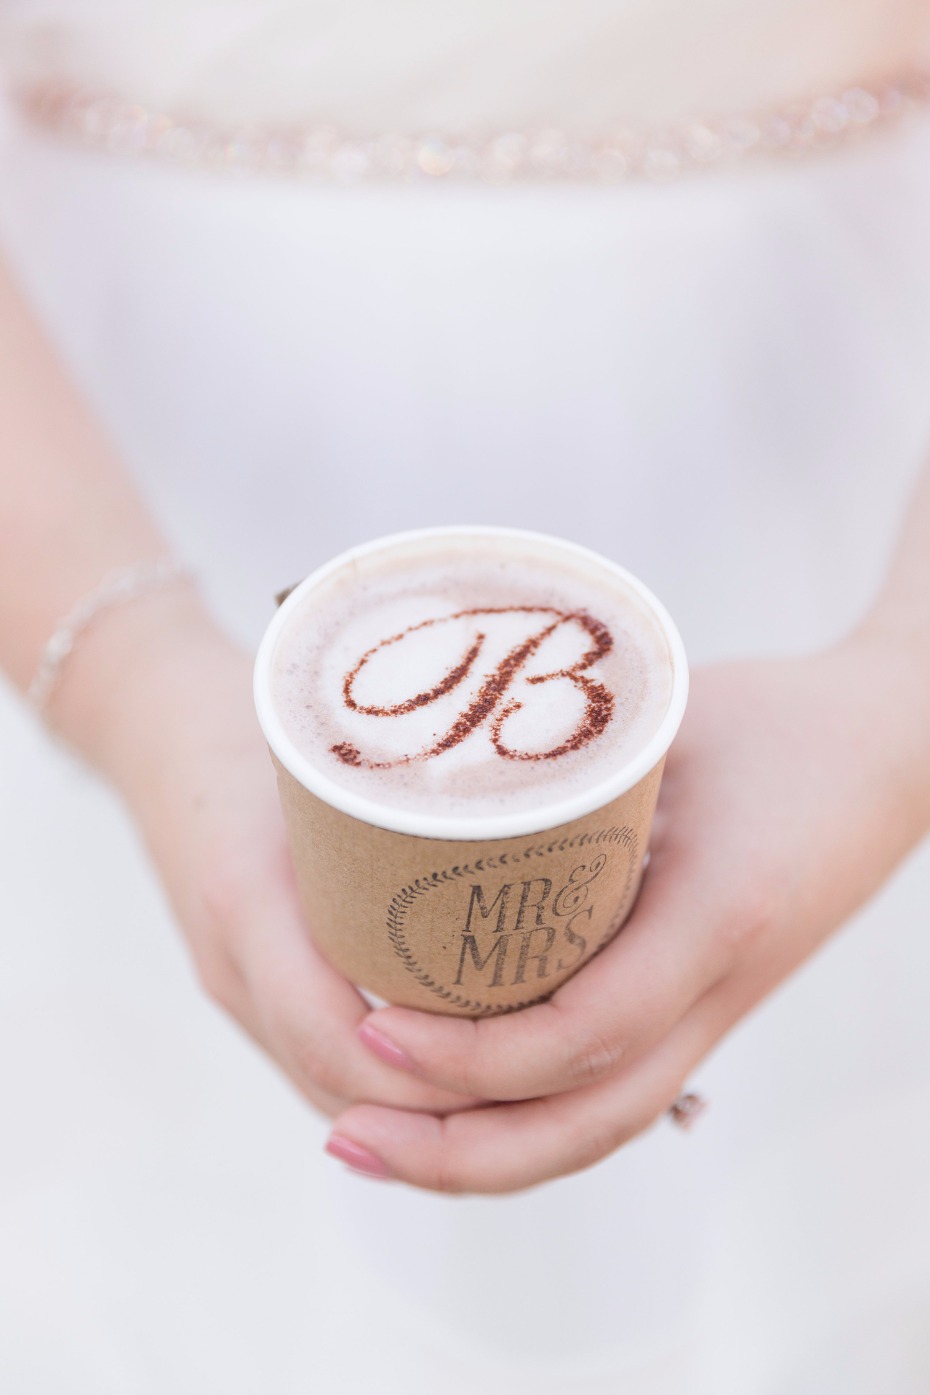 Monogrammed coffee for a wedding